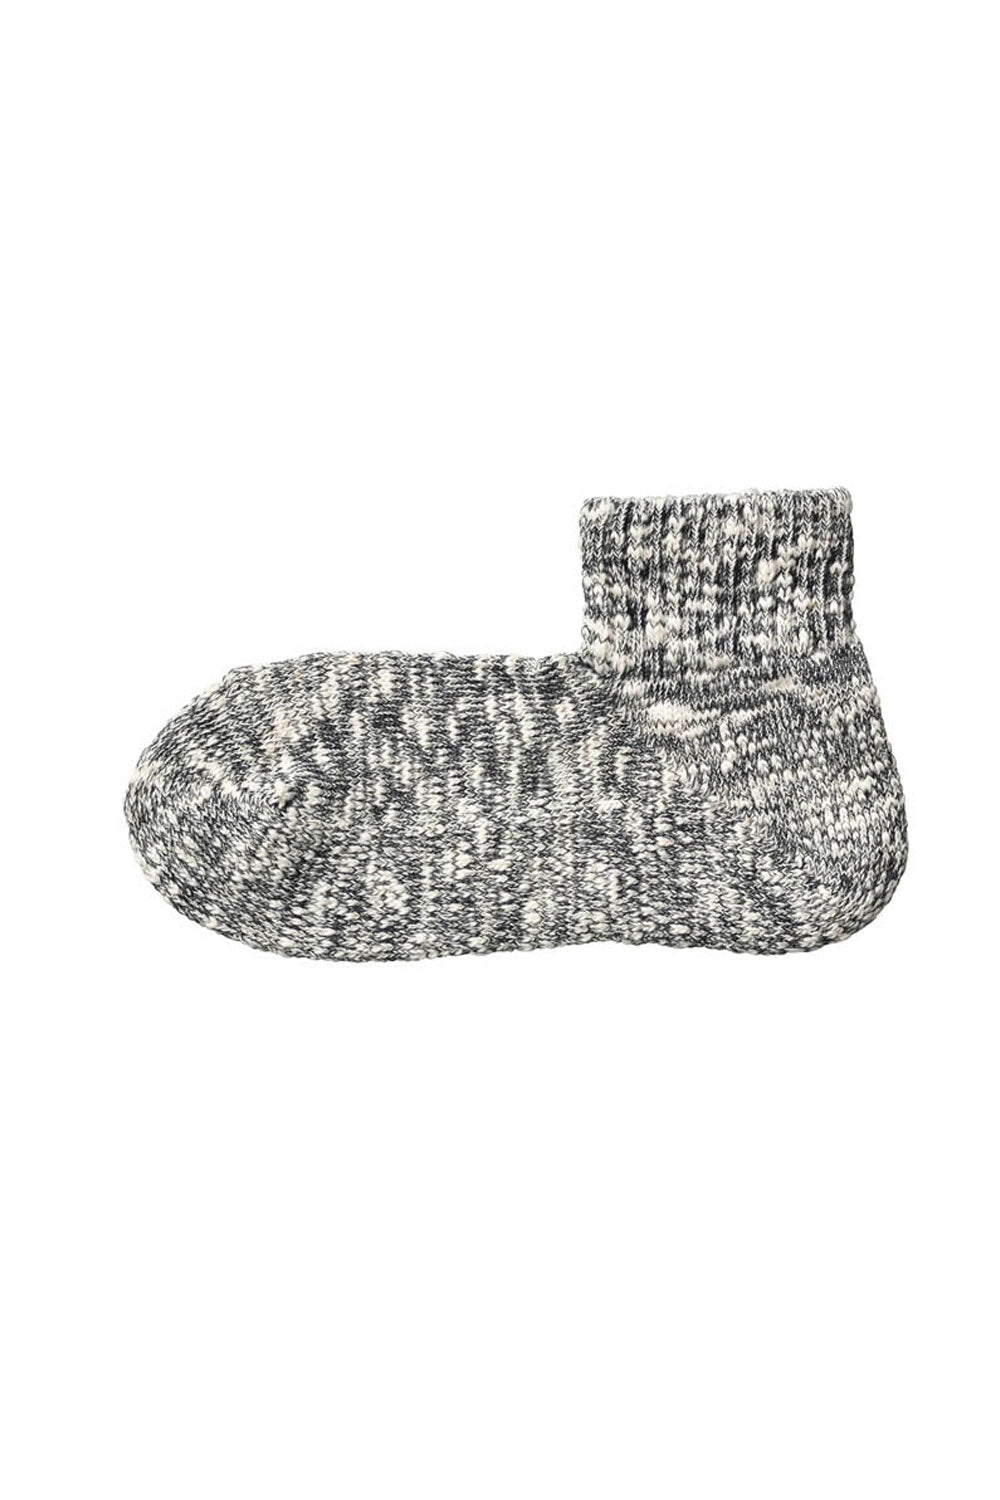 The SNOW PEAK - GARA GARA SOCK NAVY available online with global shipping, and in PAM Stores Melbourne and Sydney.